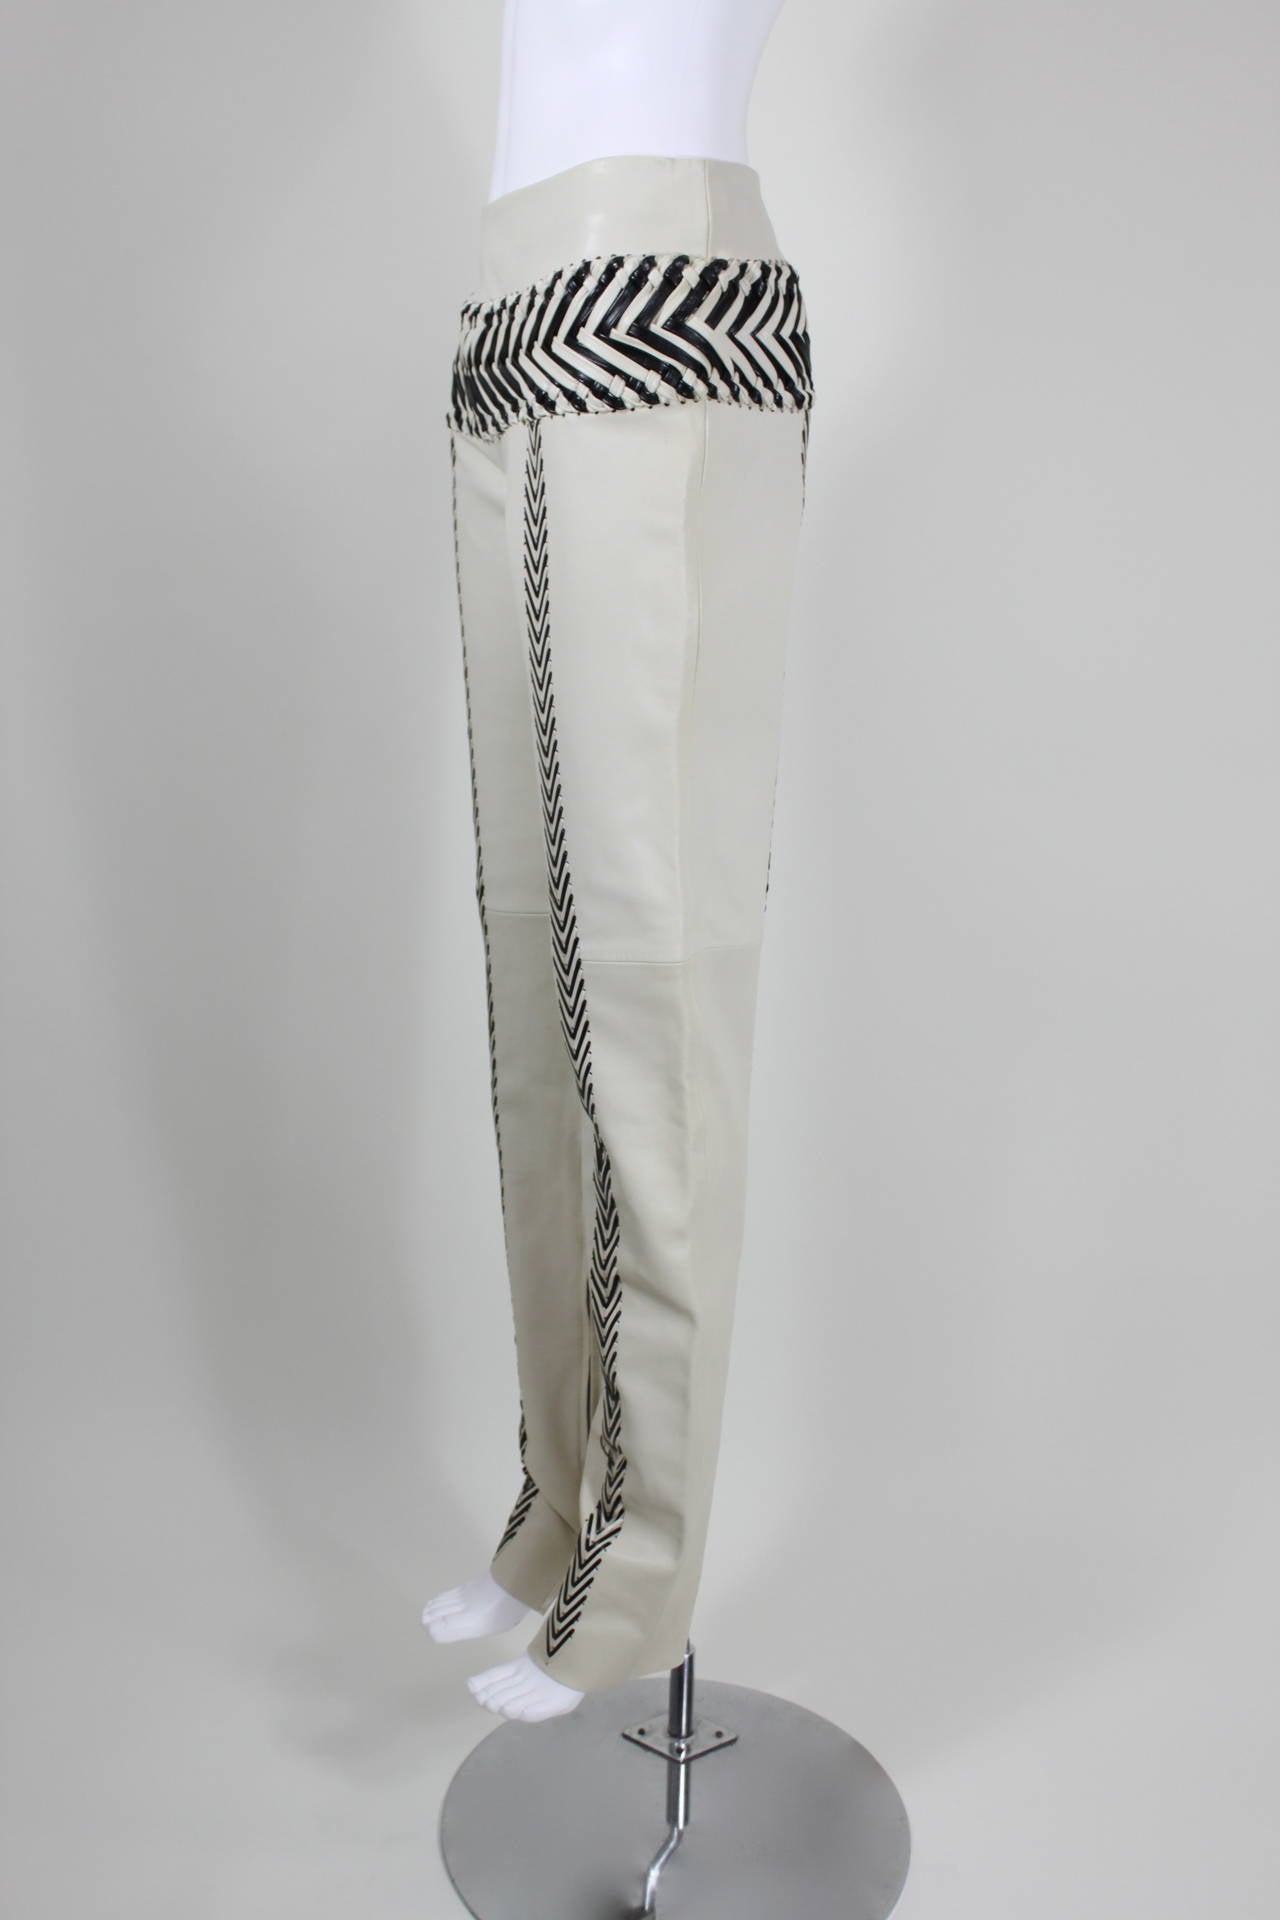 Gianfranco Ferre Cream and Black Leather Braided Trousers

-Unlined
-Zips in back
-Marked an IT size 40

Measurements--
Waist: 27 inches
Hip: 36 inches
Length, Waist to Hem: 44.5 inches
Inseam: 35 inches
Rise: 10 inches